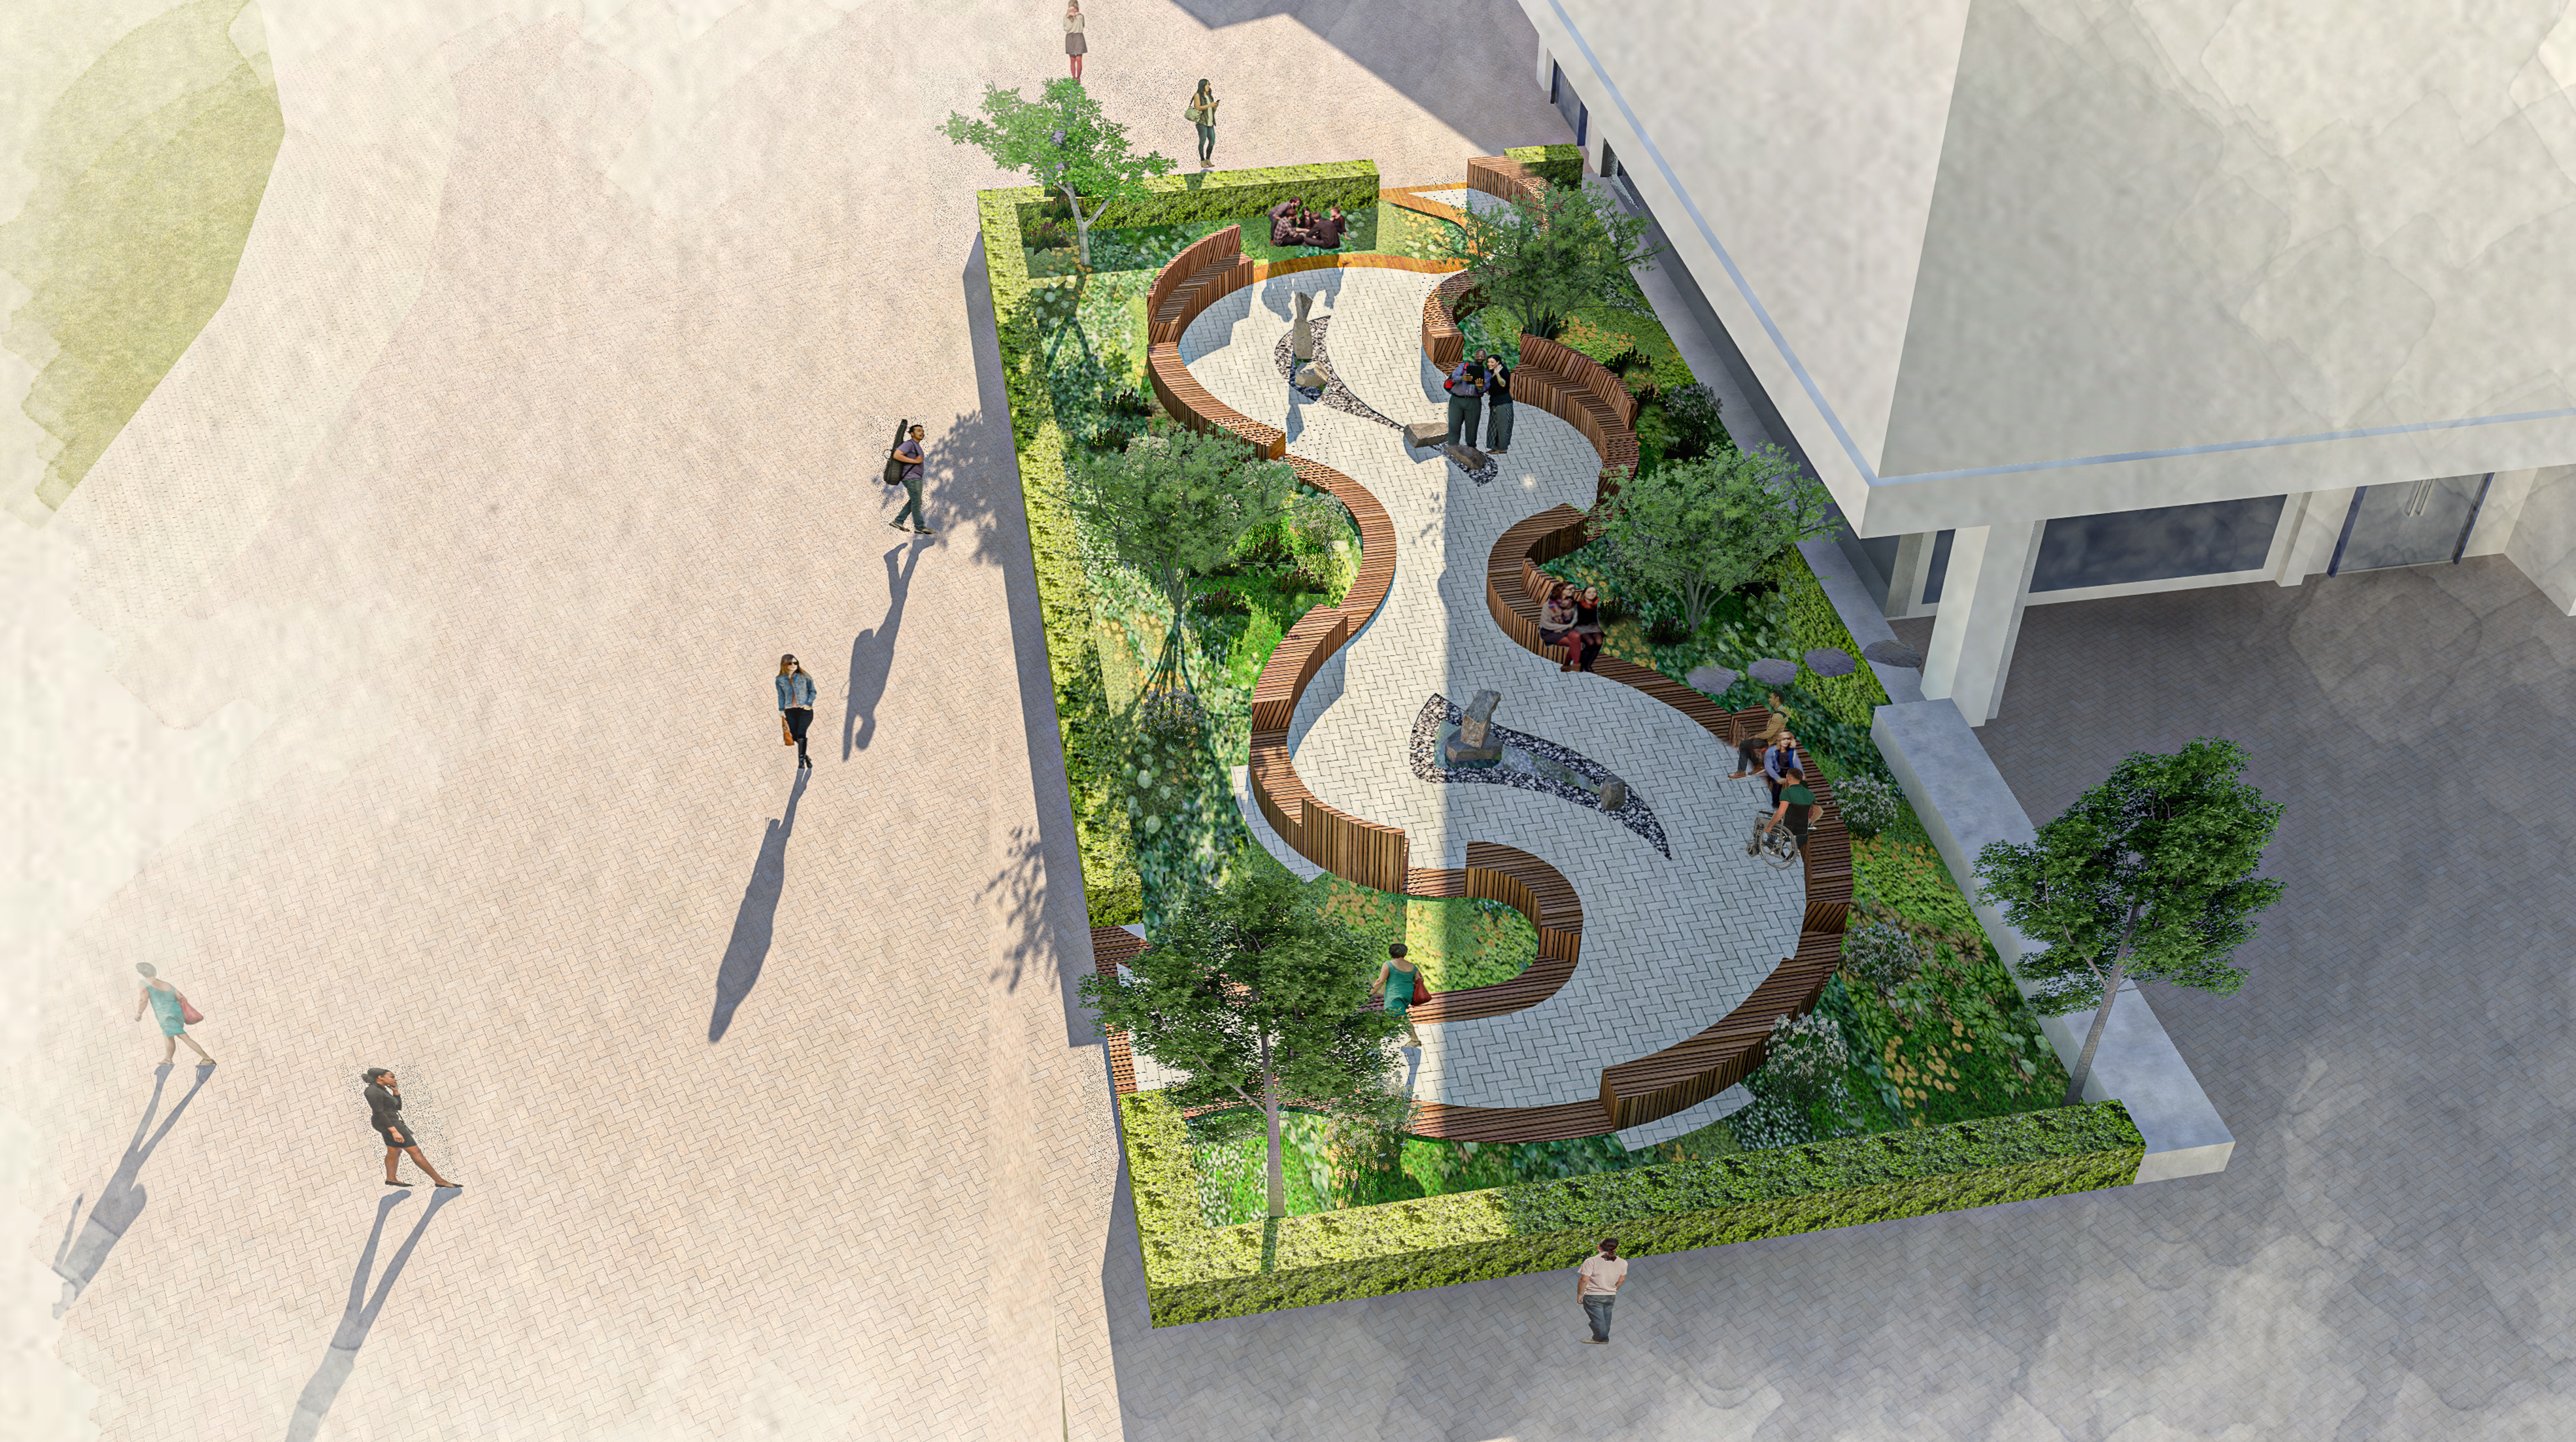 Artists rendering of Healing Garden from 100 feet above perspective showing entire walkway with shrubbery, hedges, trees and people on wooden benches.  